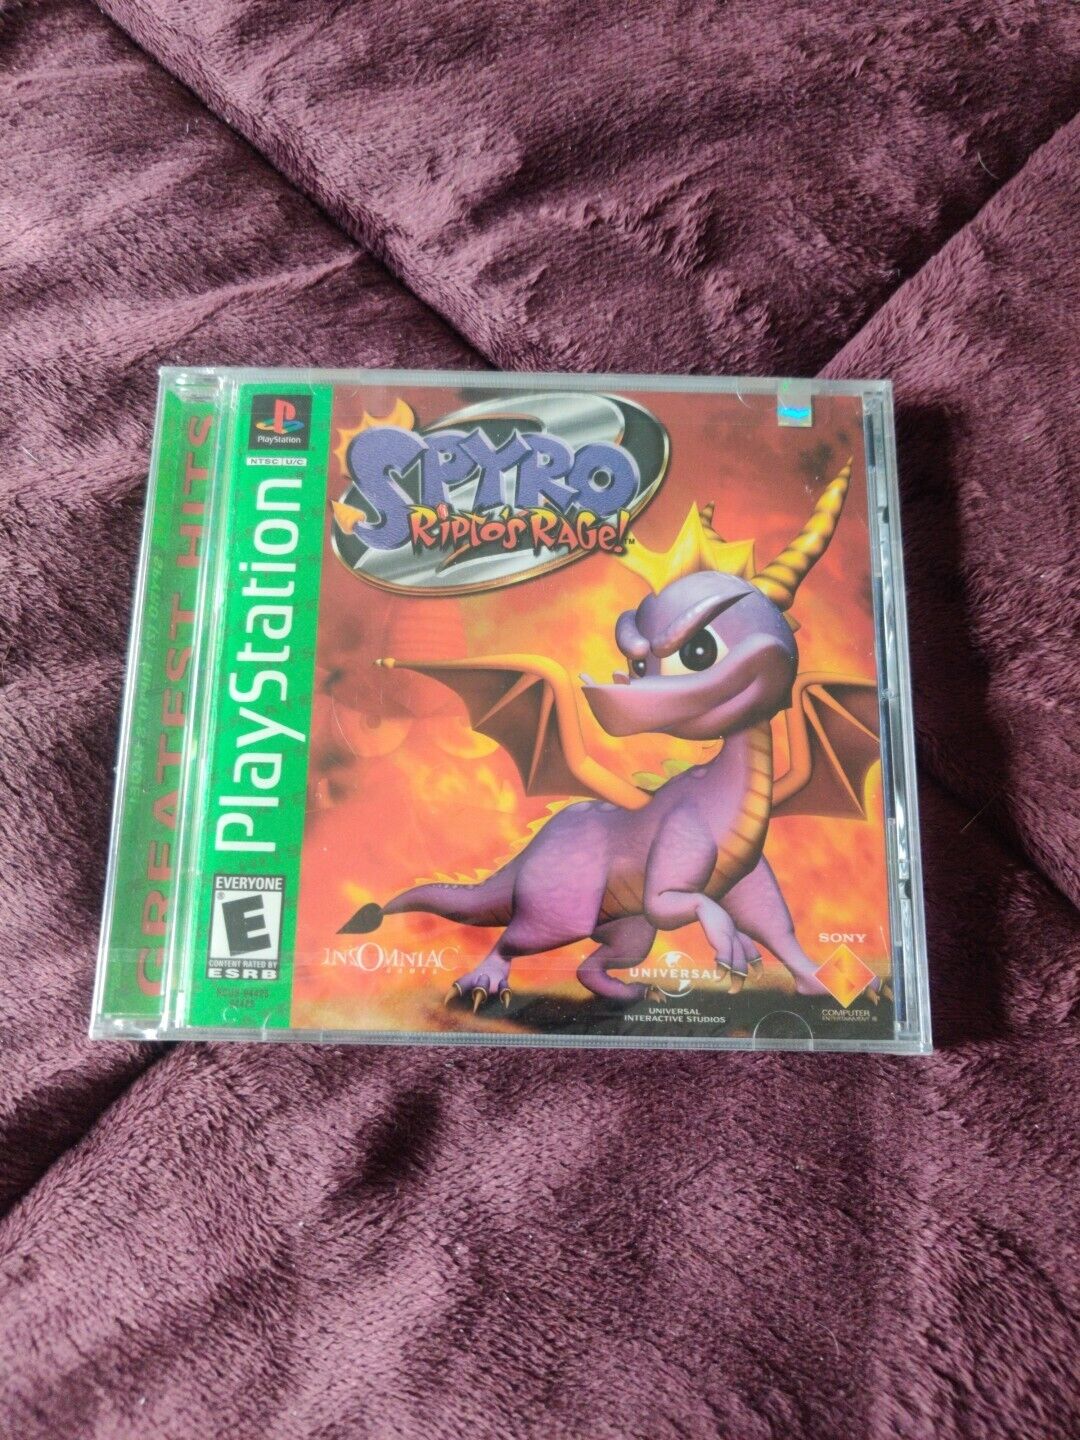 PS1 Spyro Ripto's Rage Greatest Hits Playstation 1  New & Factory Sealed! NICE